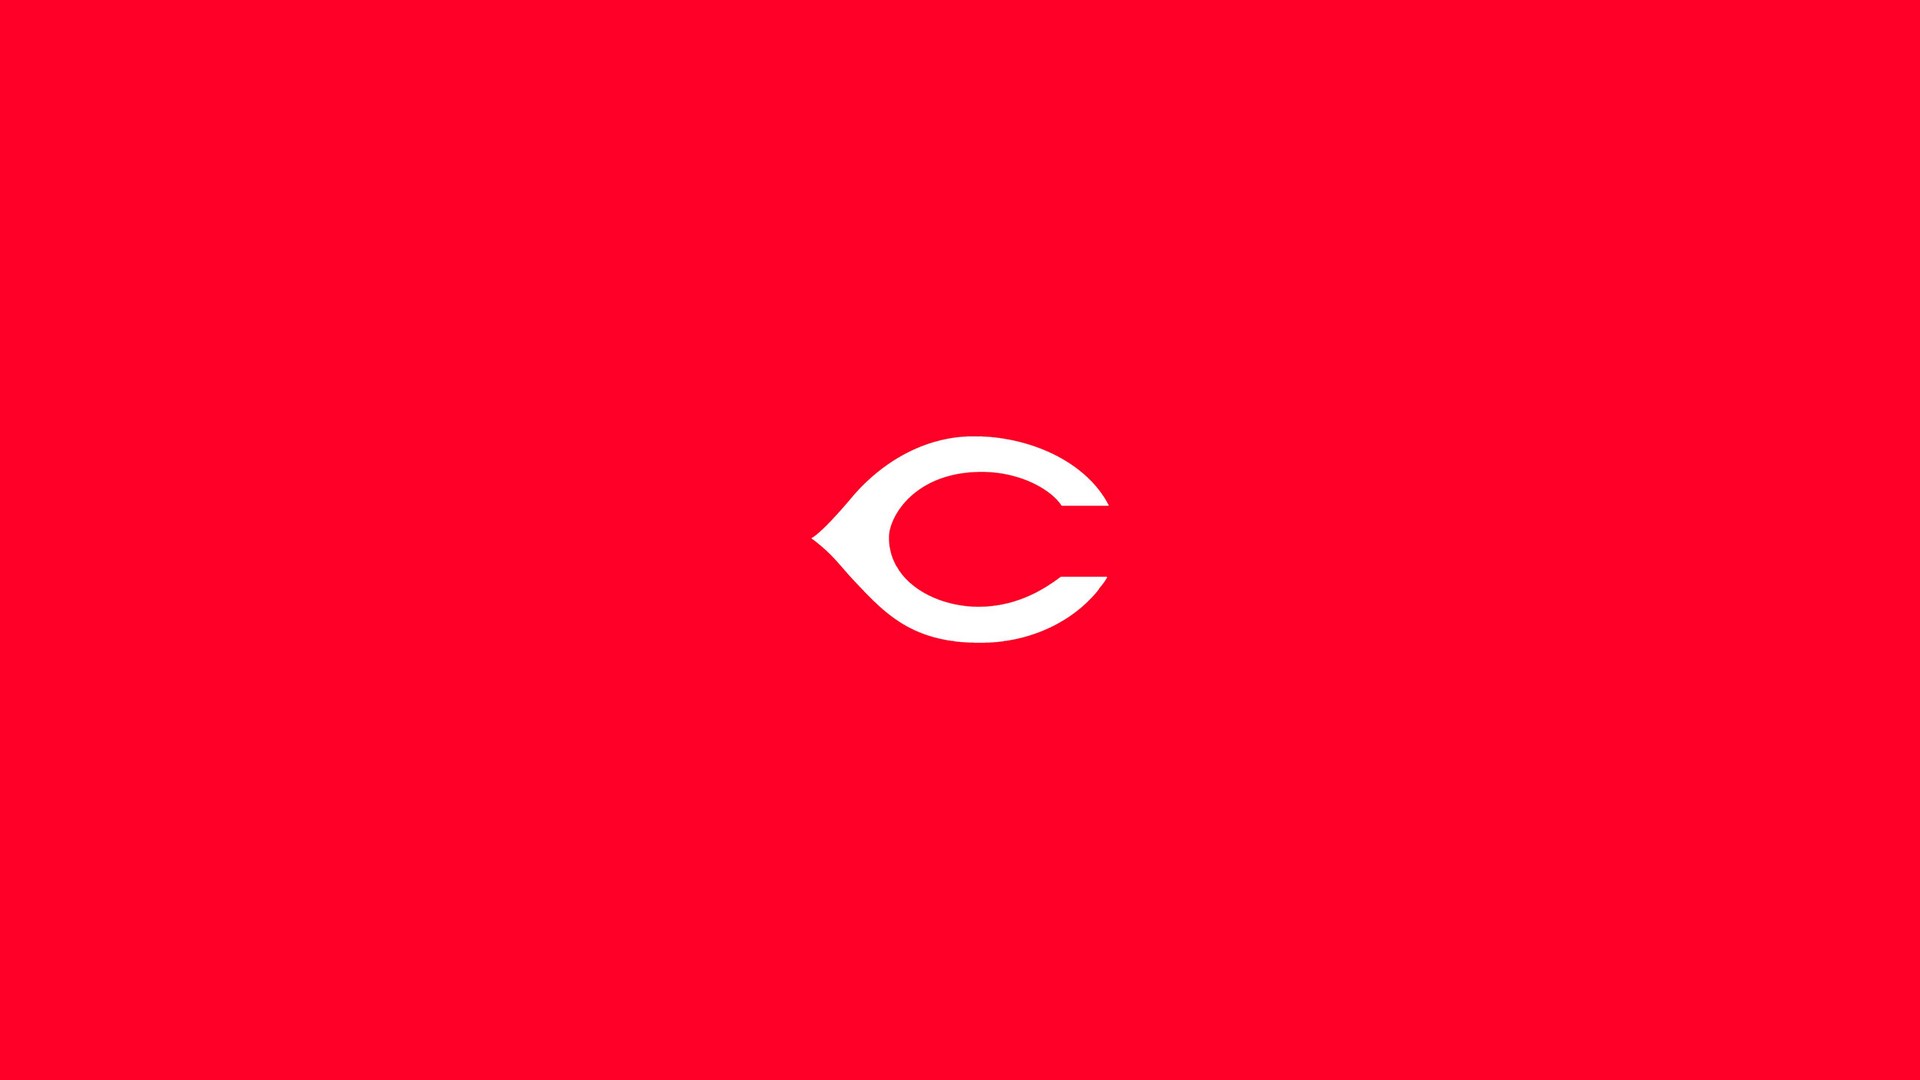 Cincinnati Reds MLB For Desktop Wallpaper With high-resolution 1920X1080 pixel. You can use this wallpaper for Mac Desktop Wallpaper, Laptop Screensavers, Android Wallpapers, Tablet or iPhone Home Screen and another mobile phone device